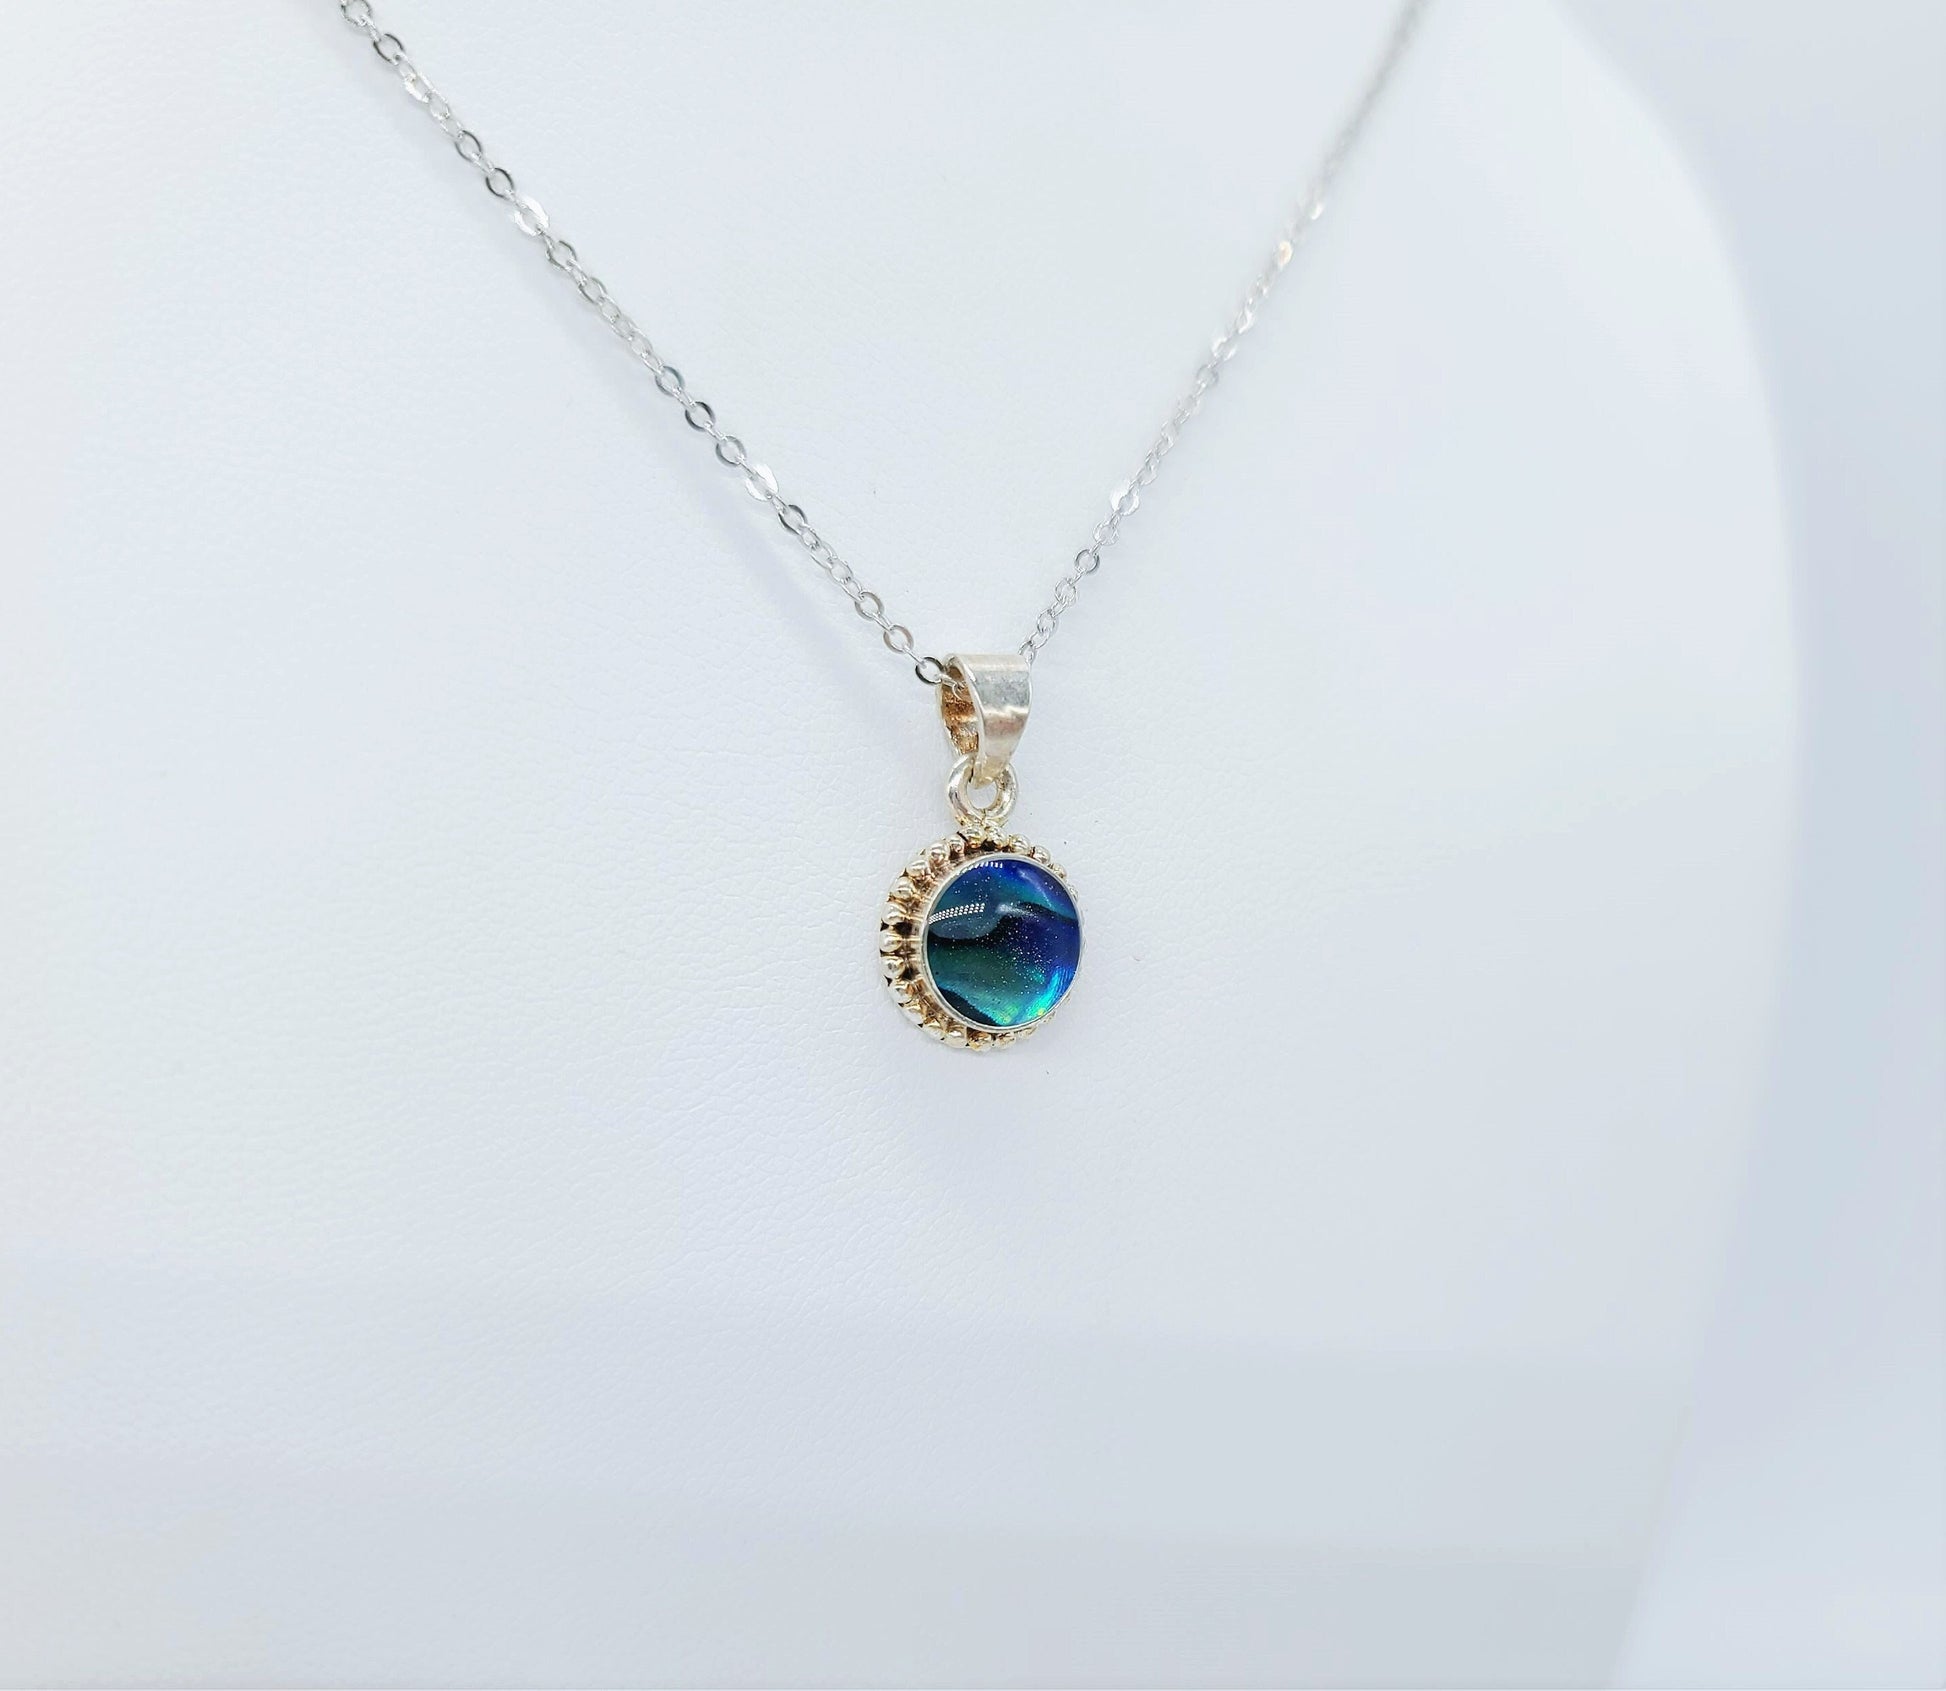 Genuine Blue Abalone Shell 925 Sterling Silver Pendant Necklace with 8x8mm Cabochon Setting Covered with Holographic Powder Infused Resin